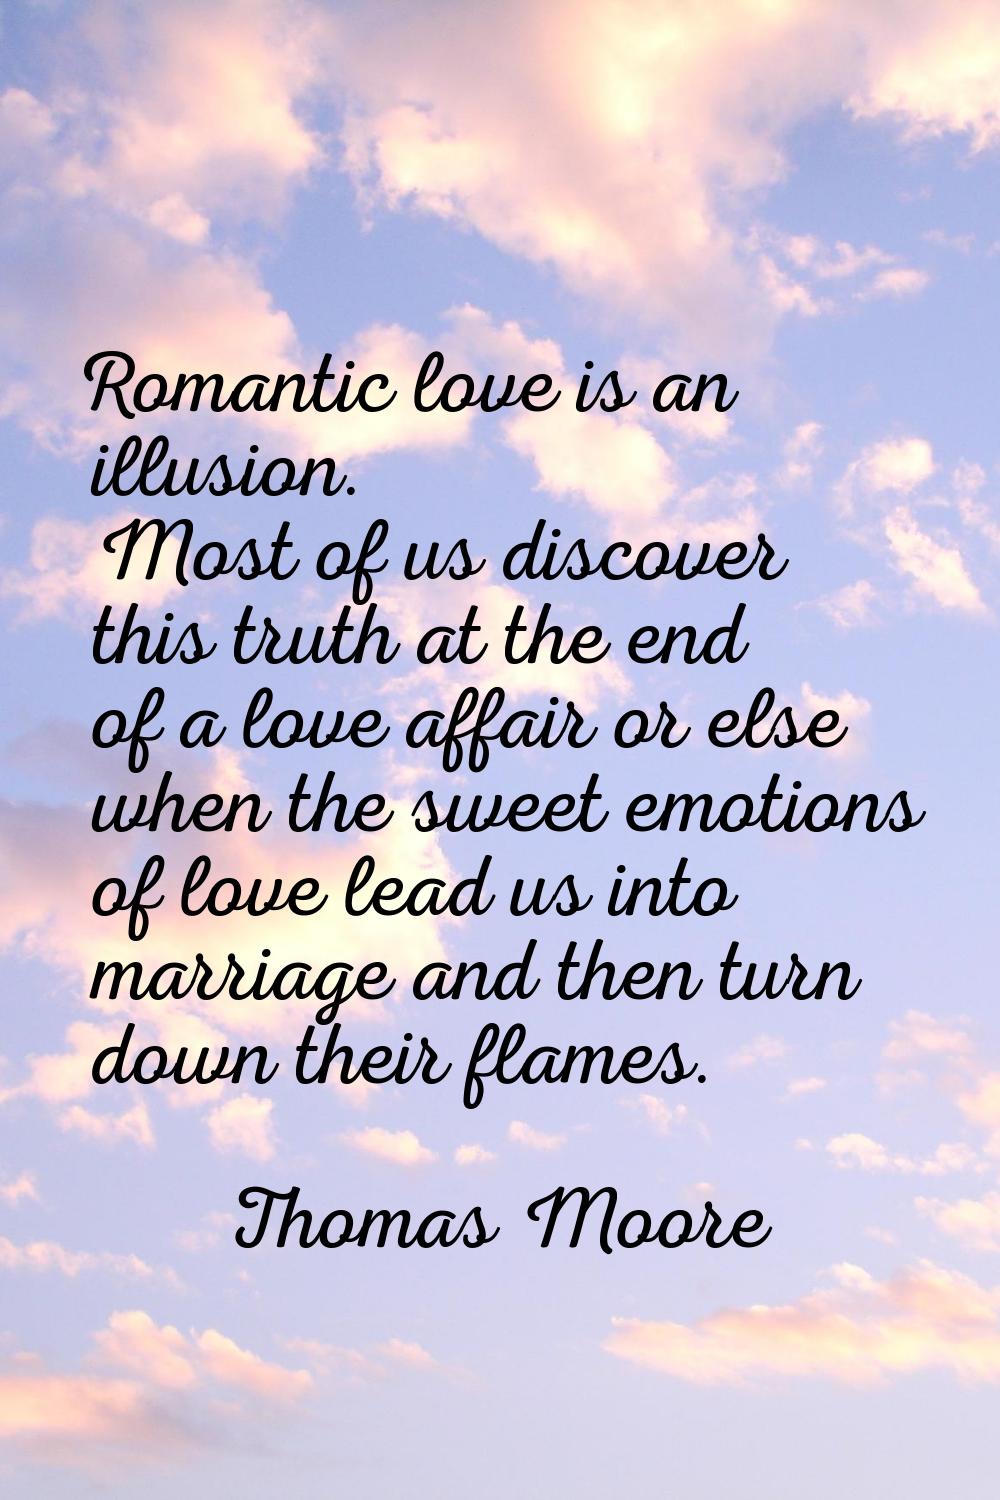 Romantic love is an illusion. Most of us discover this truth at the end of a love affair or else wh